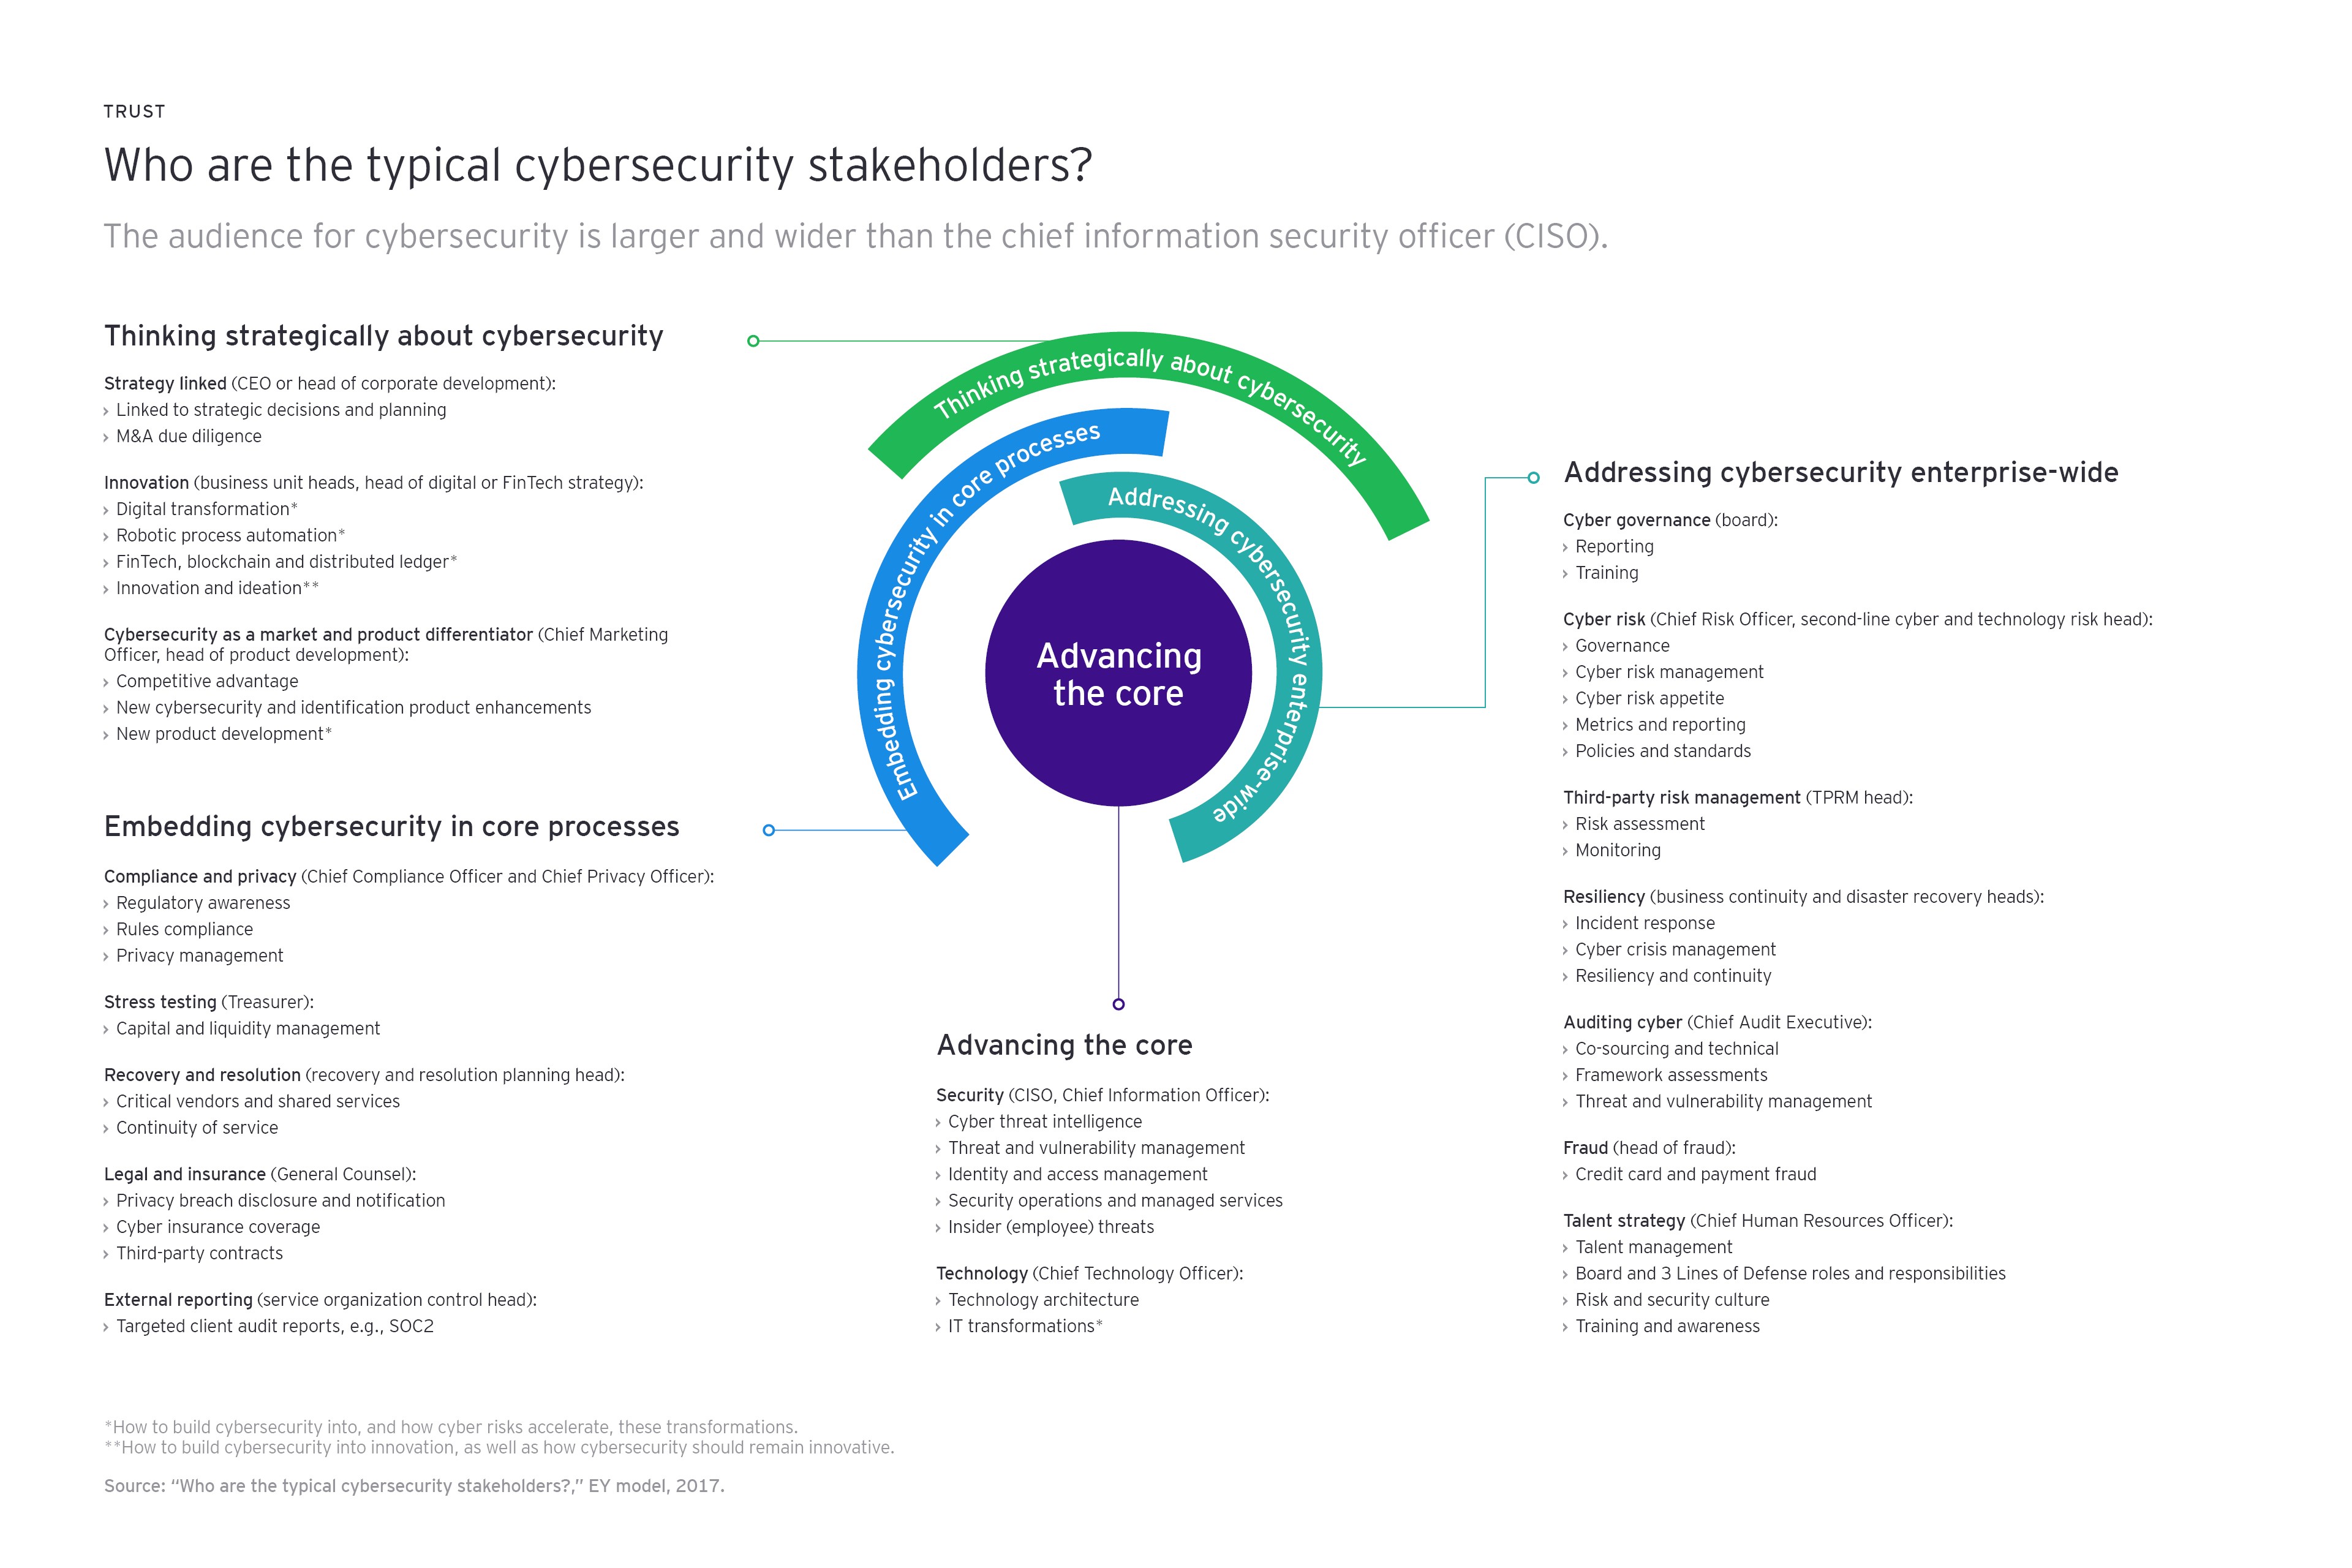 Who are the typical cyber security stakeholders info graph